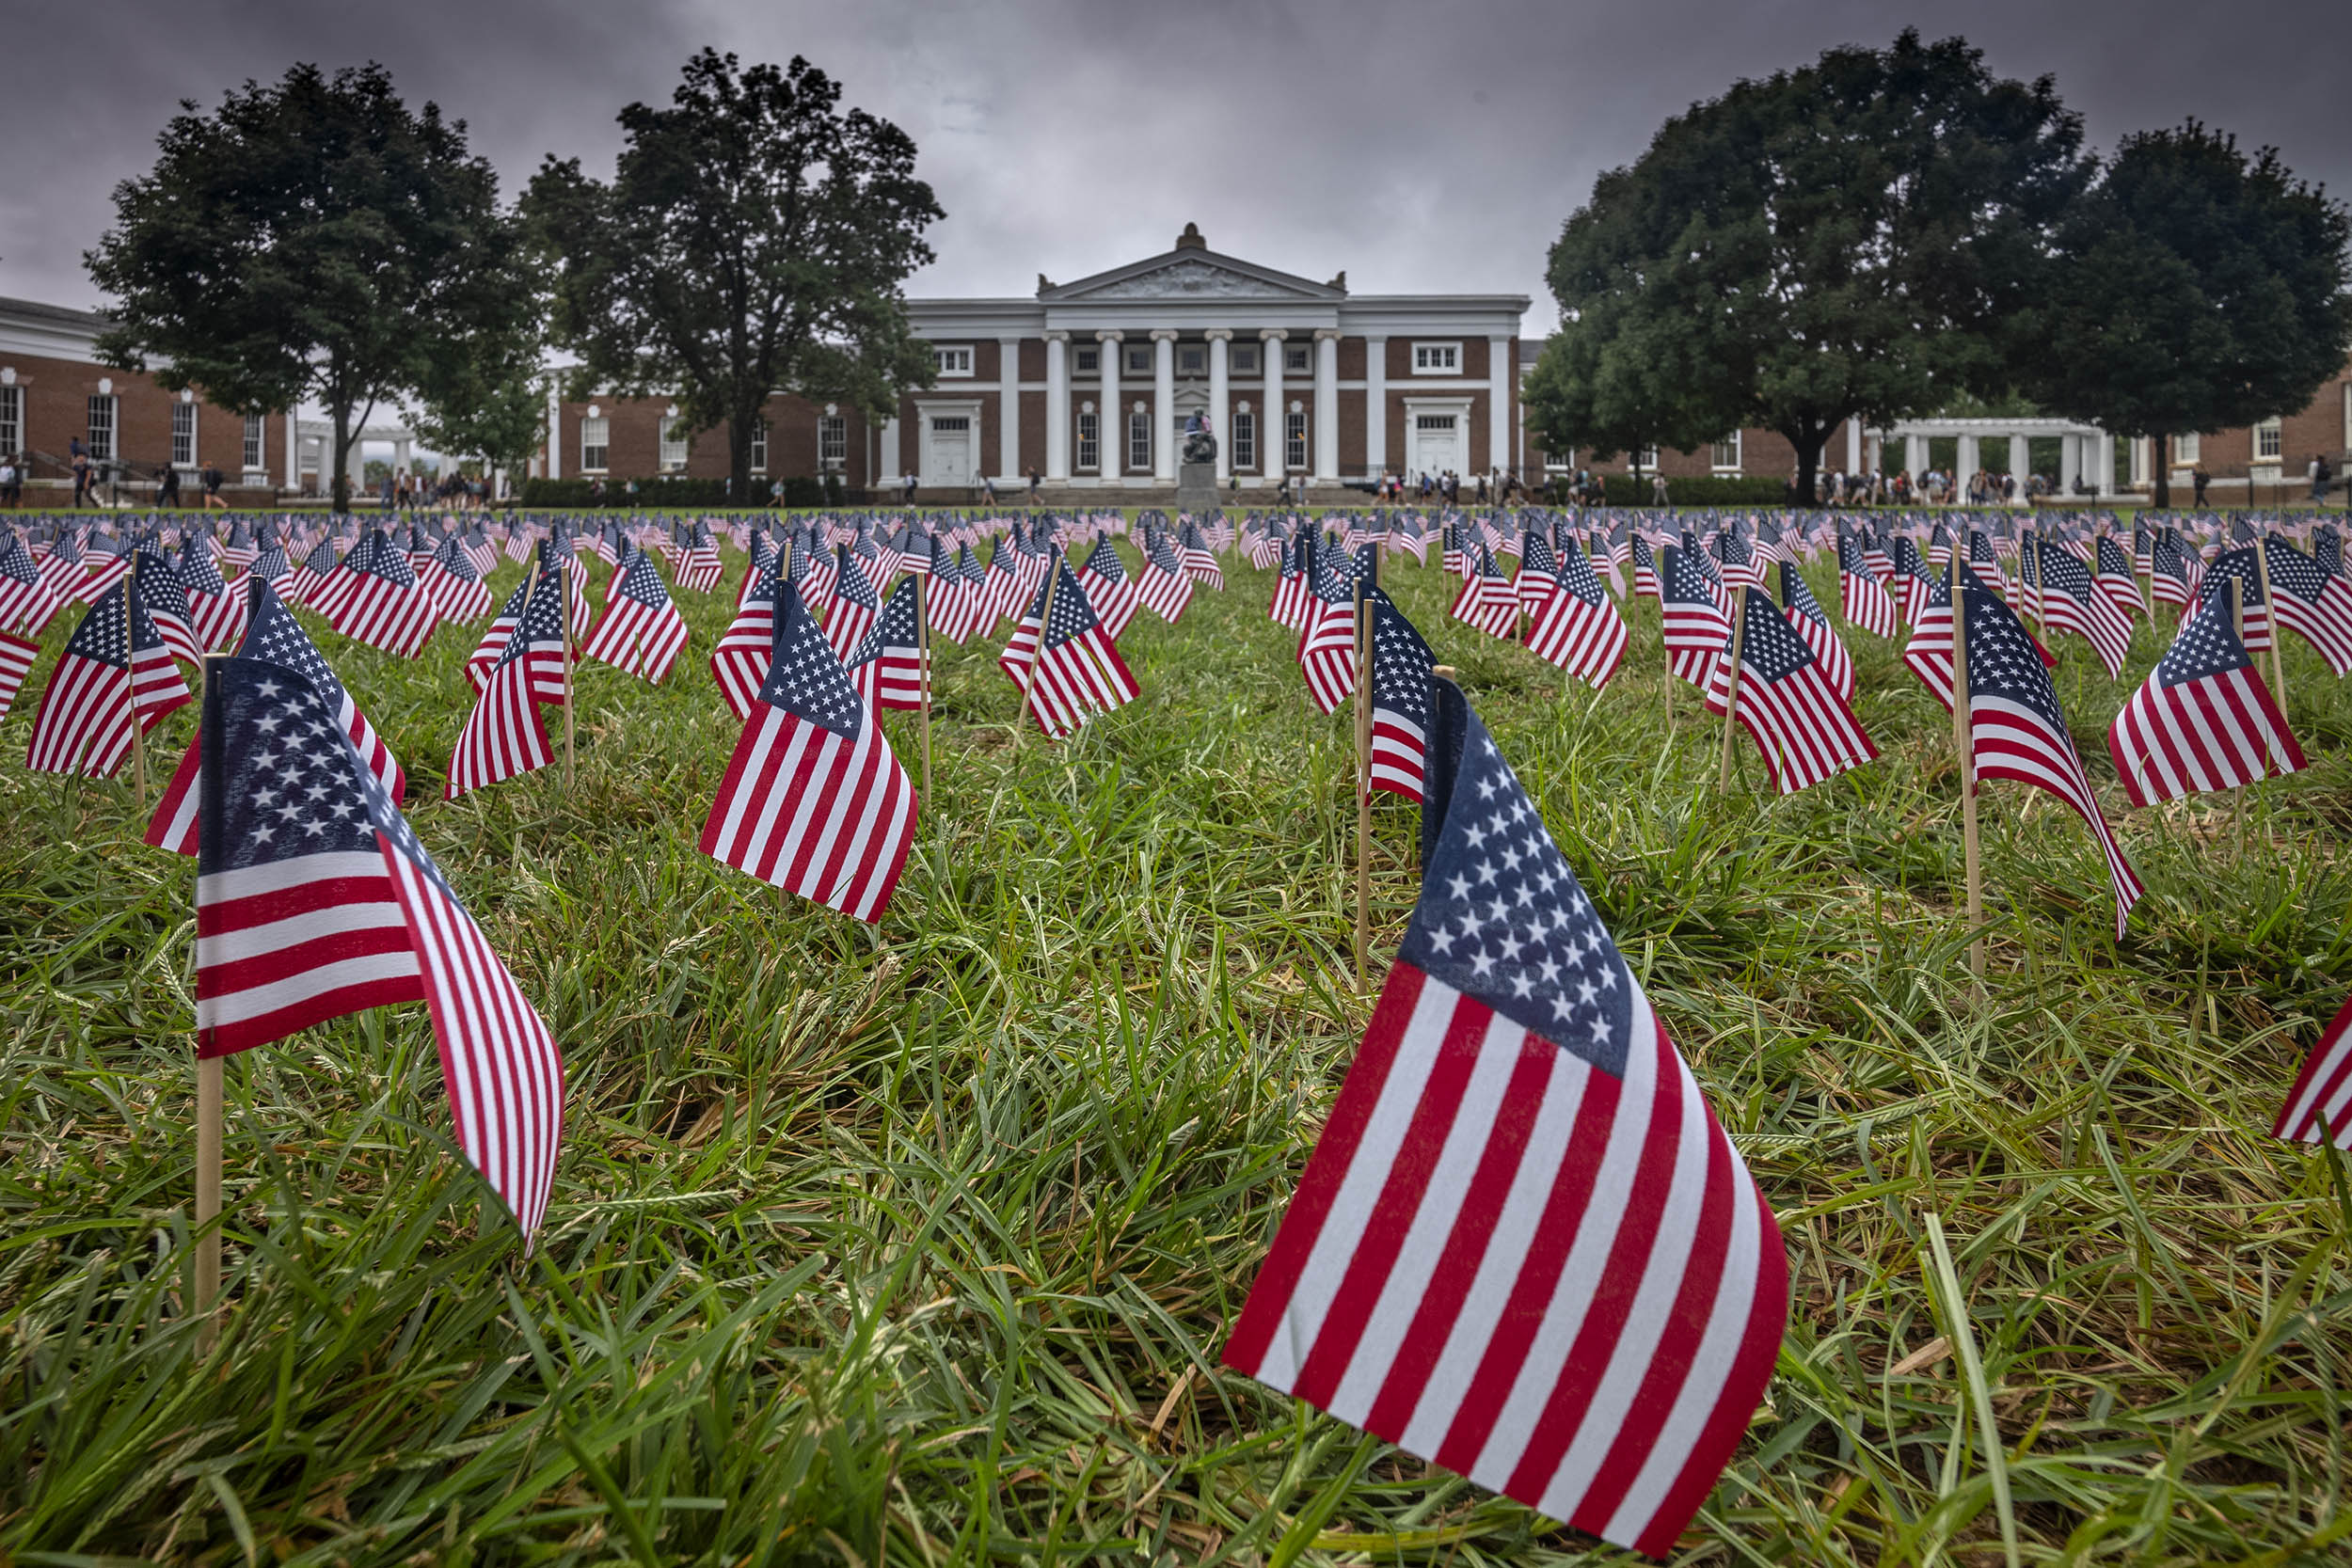 The Lawn filled with small American Flags